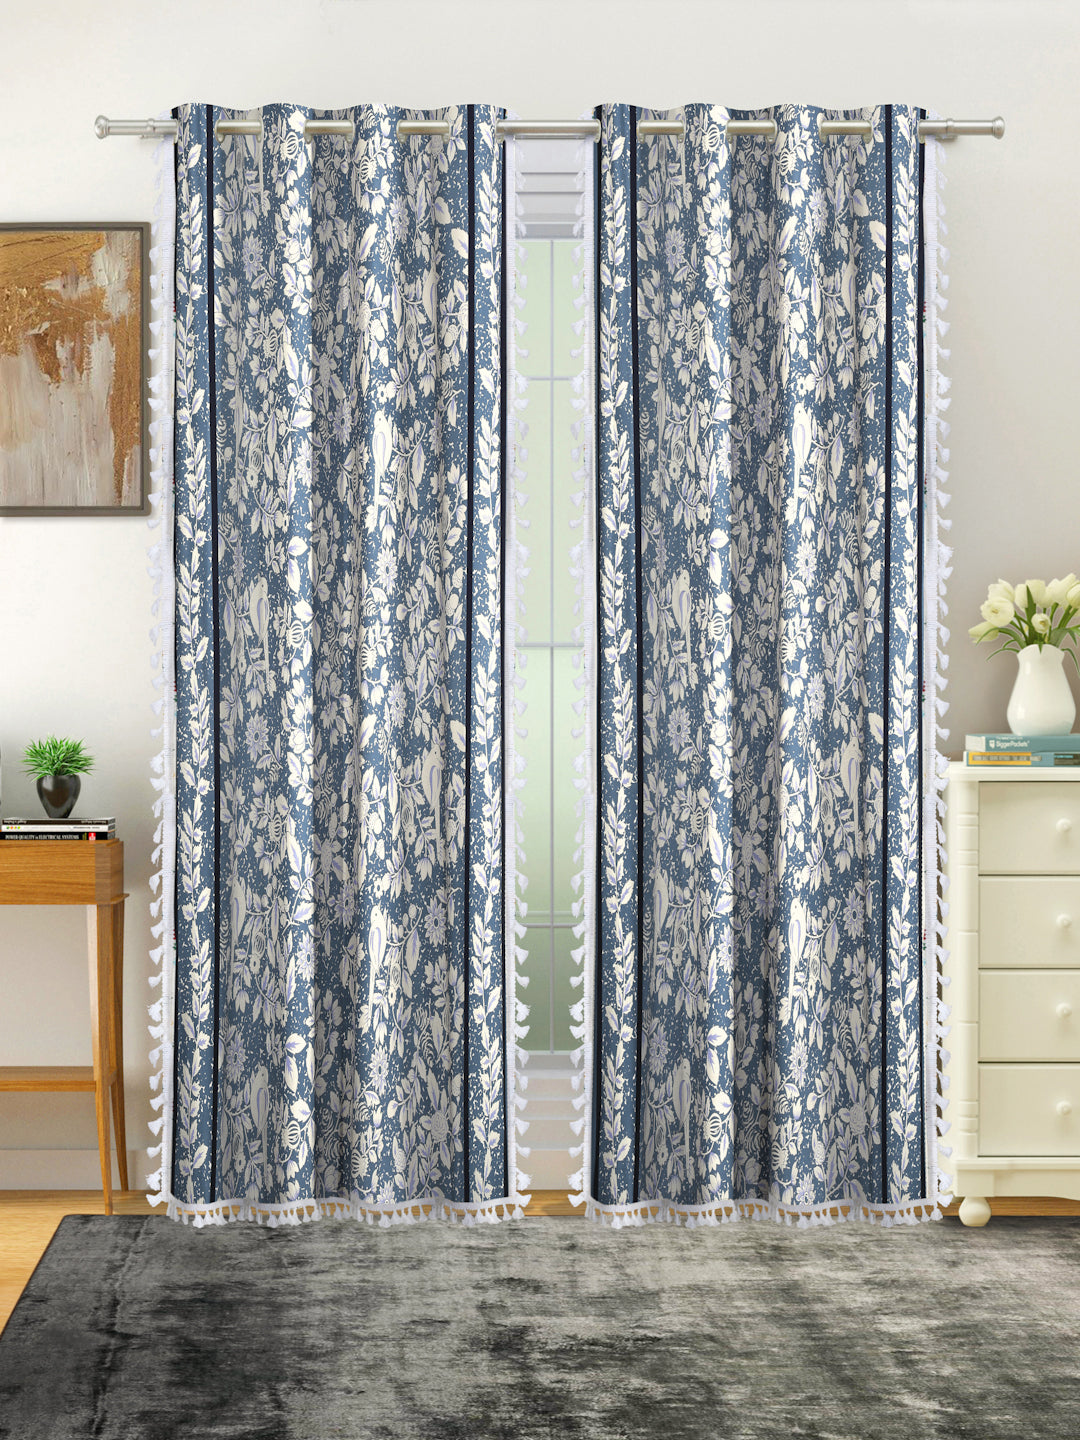 Cotton Printed Boho Light Filtering Door Curtain with Lace- Navy Blue (Pack of 1)